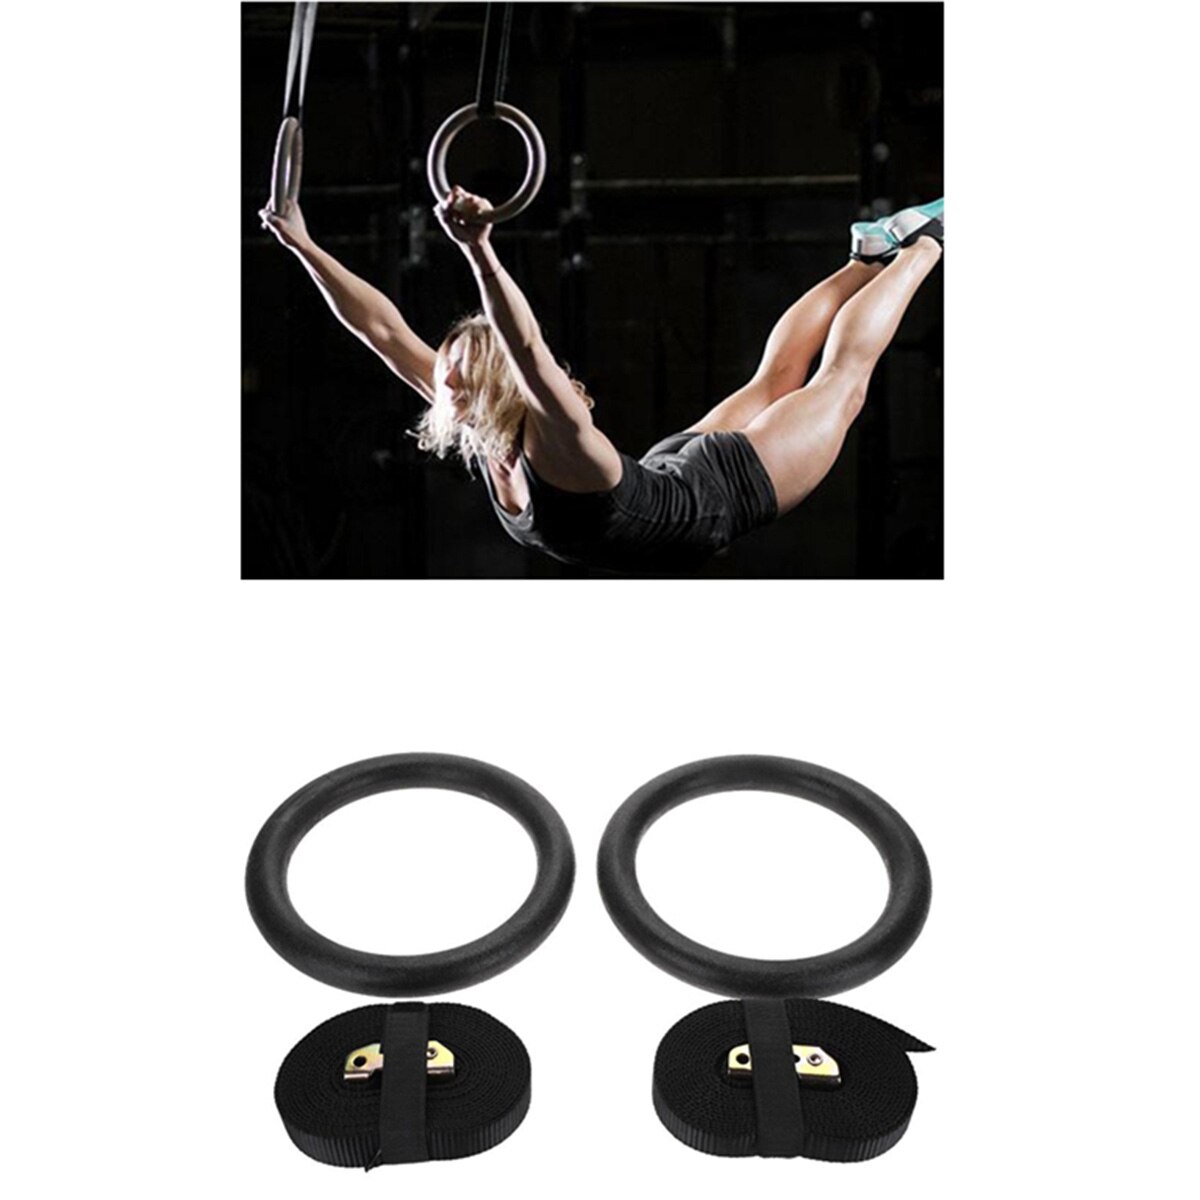 Gymnastic Gym Rings Black Adjustable Fitness Muscle Fitness Rings Strength Training Straps Hoop Fitness Equipment Fast